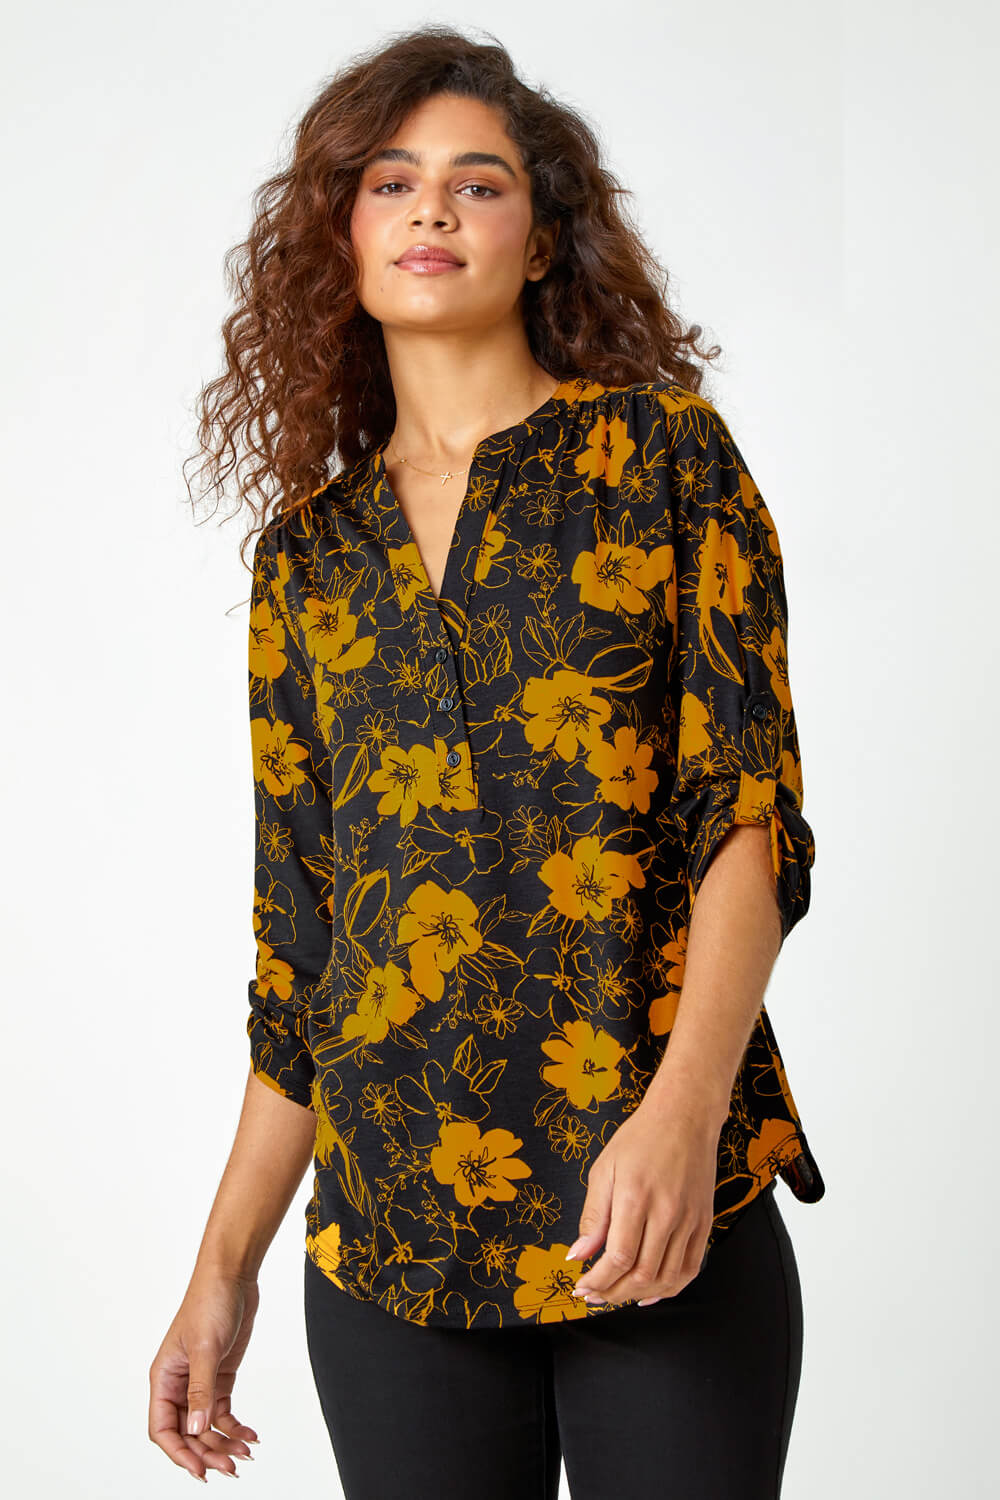 Ochre Floral Print Stretch Shirt, Image 4 of 5